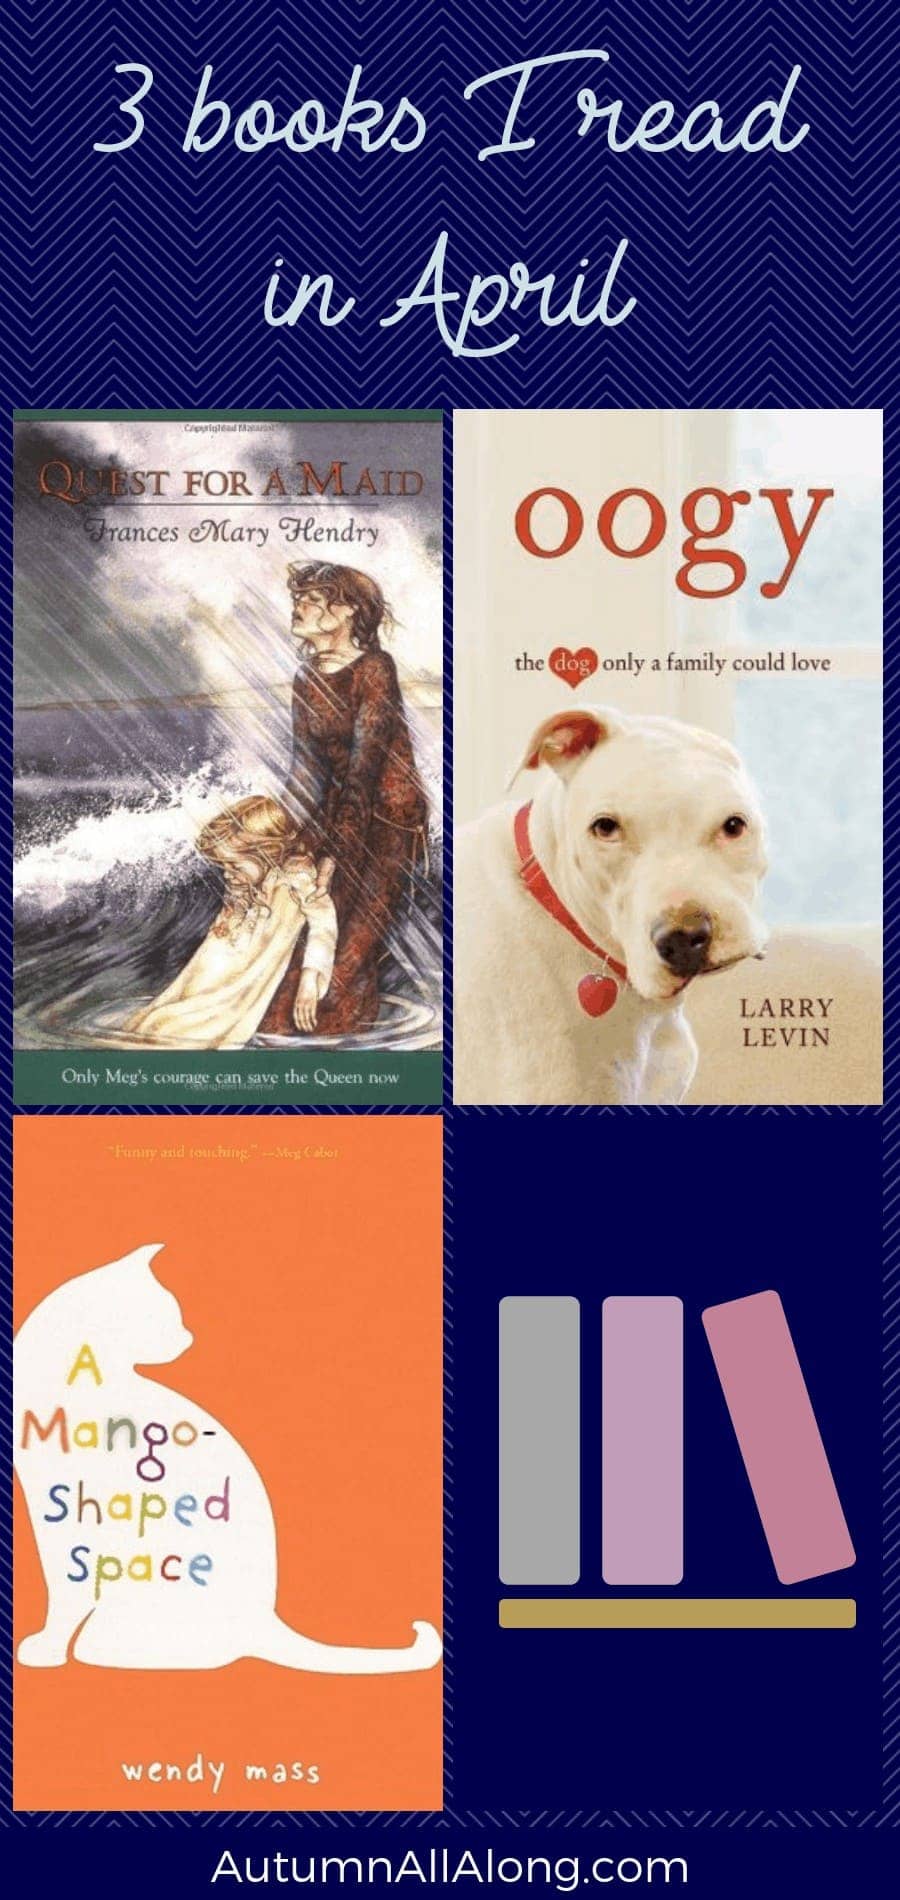 These are the books I read in April. Reviews on: Oogy, A Mango Shaped Space, and Quest for a Maid. | via Autumn All Along